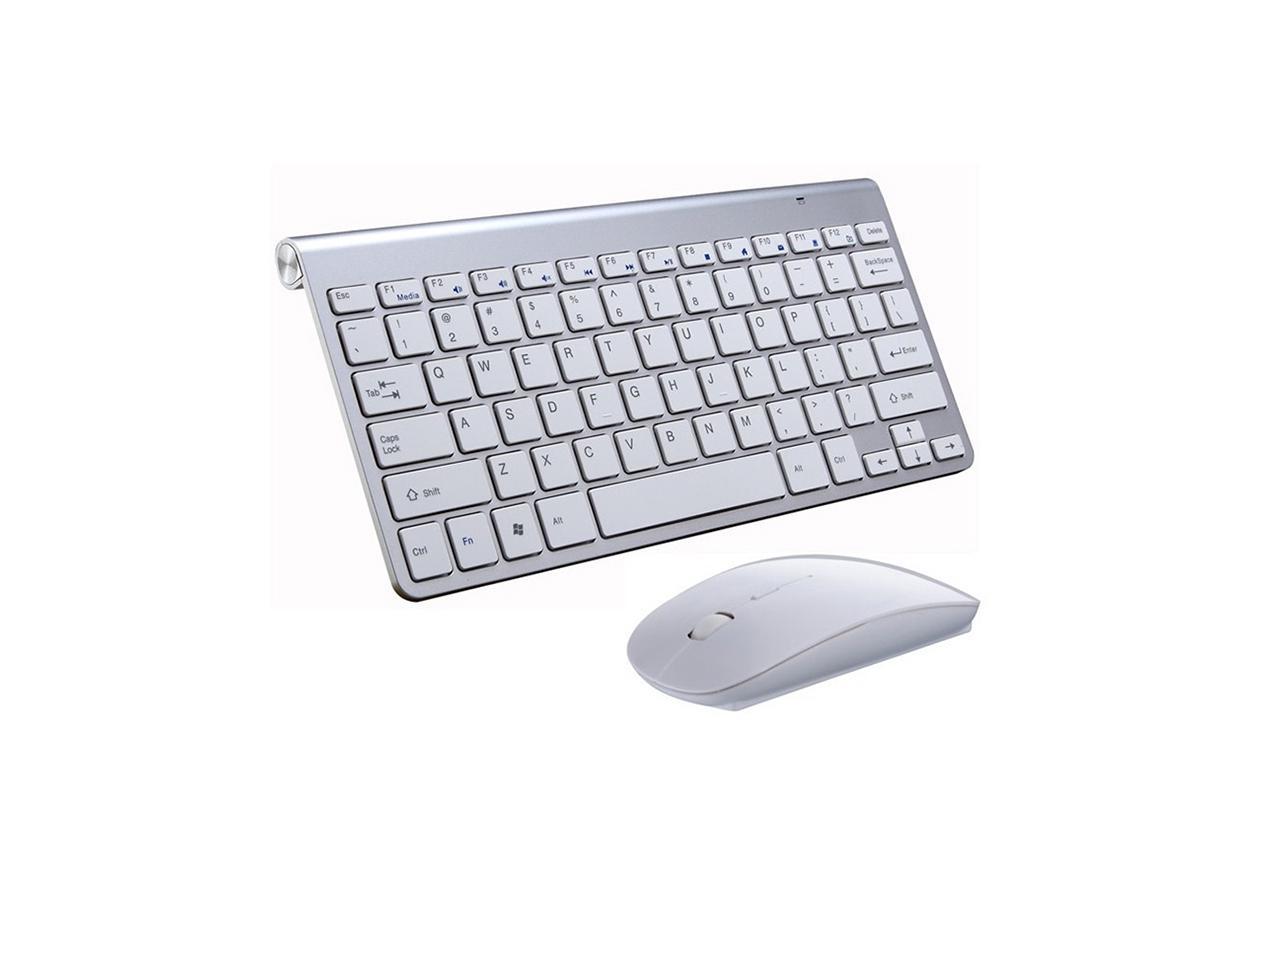 HF-KWM01: 2.4GHz Ultra-Thin Wireless 2.4G keyboard and Mouse Combo - Click Image to Close